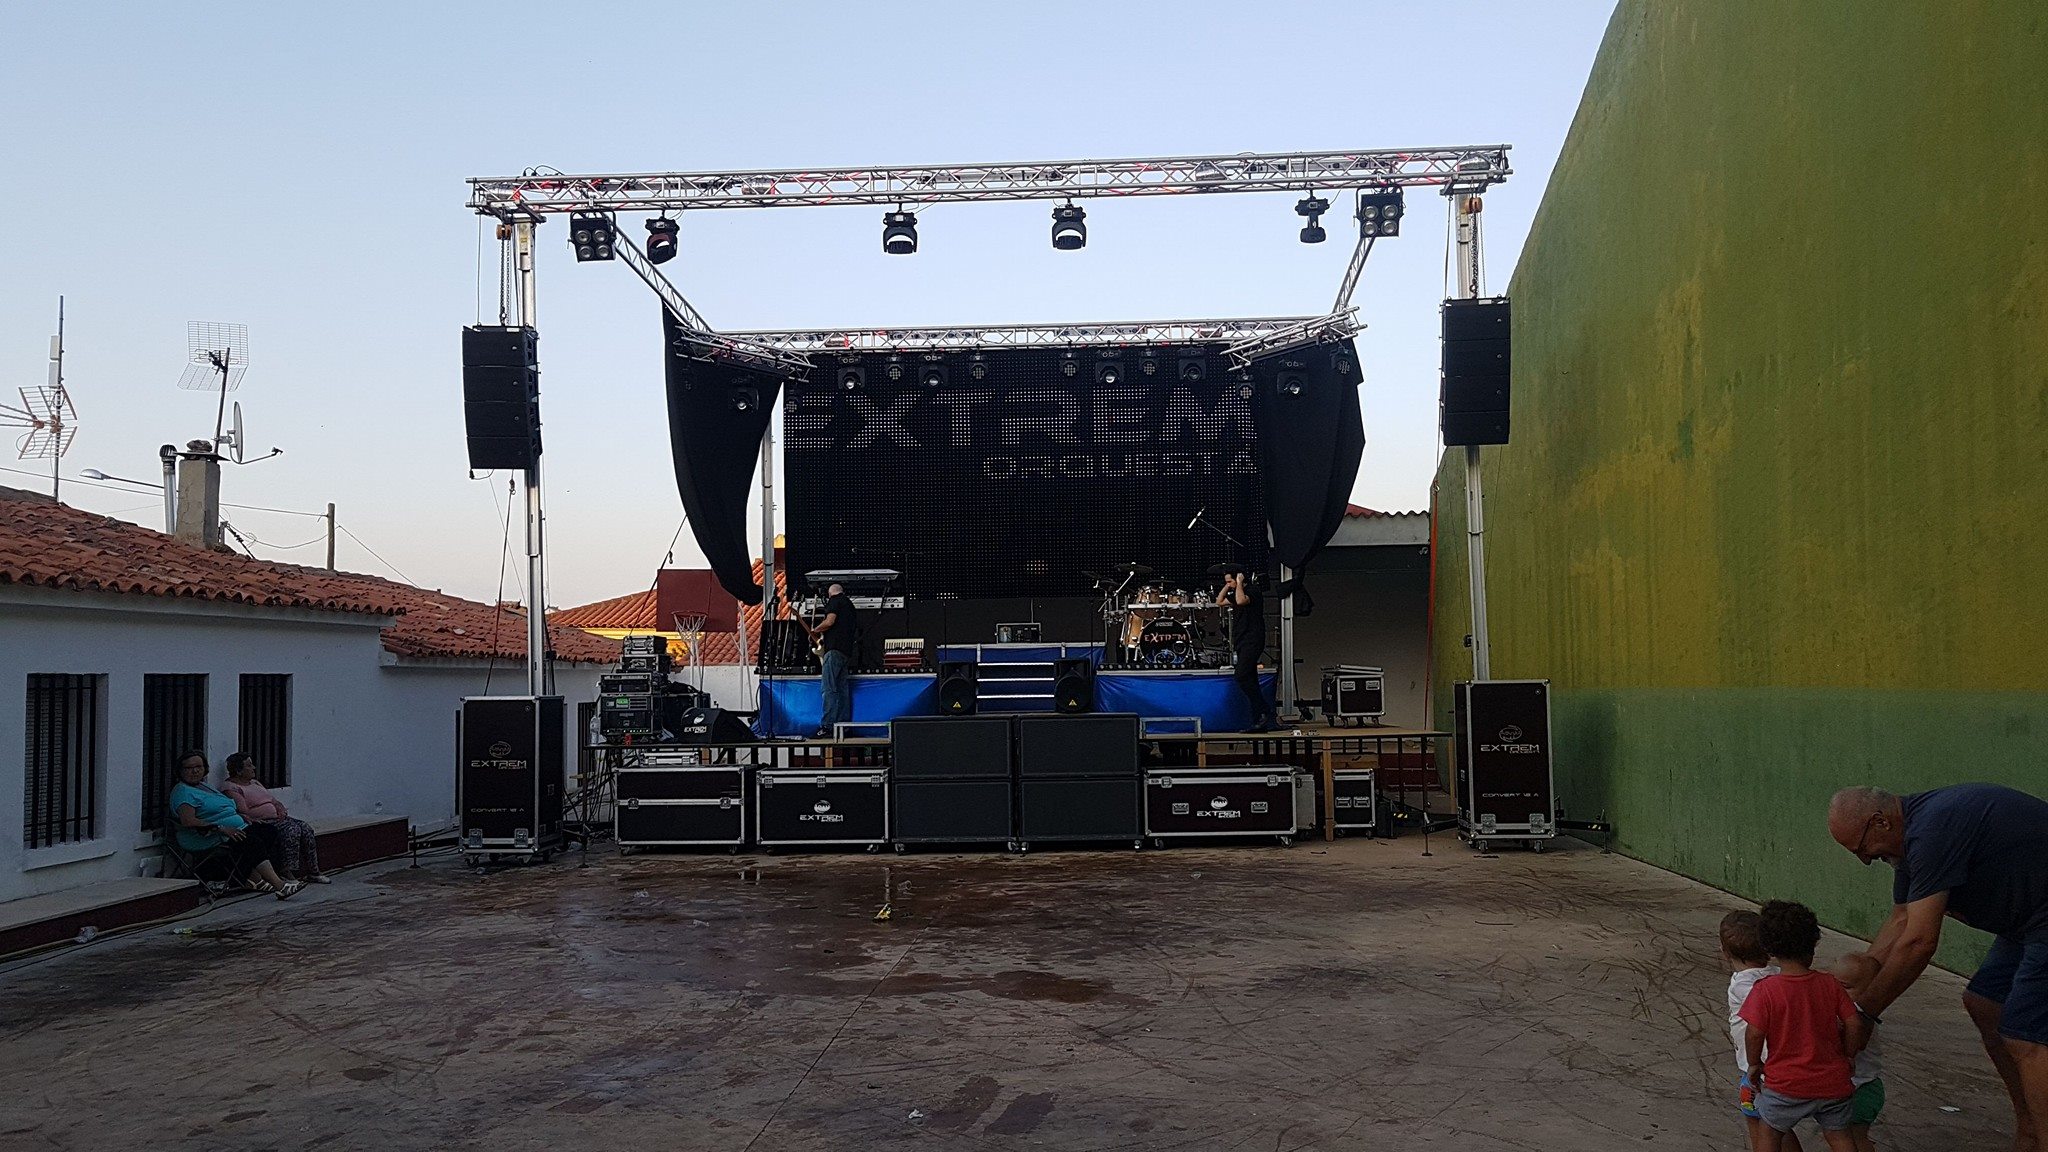 Orchestra Extreme @ (Spain)